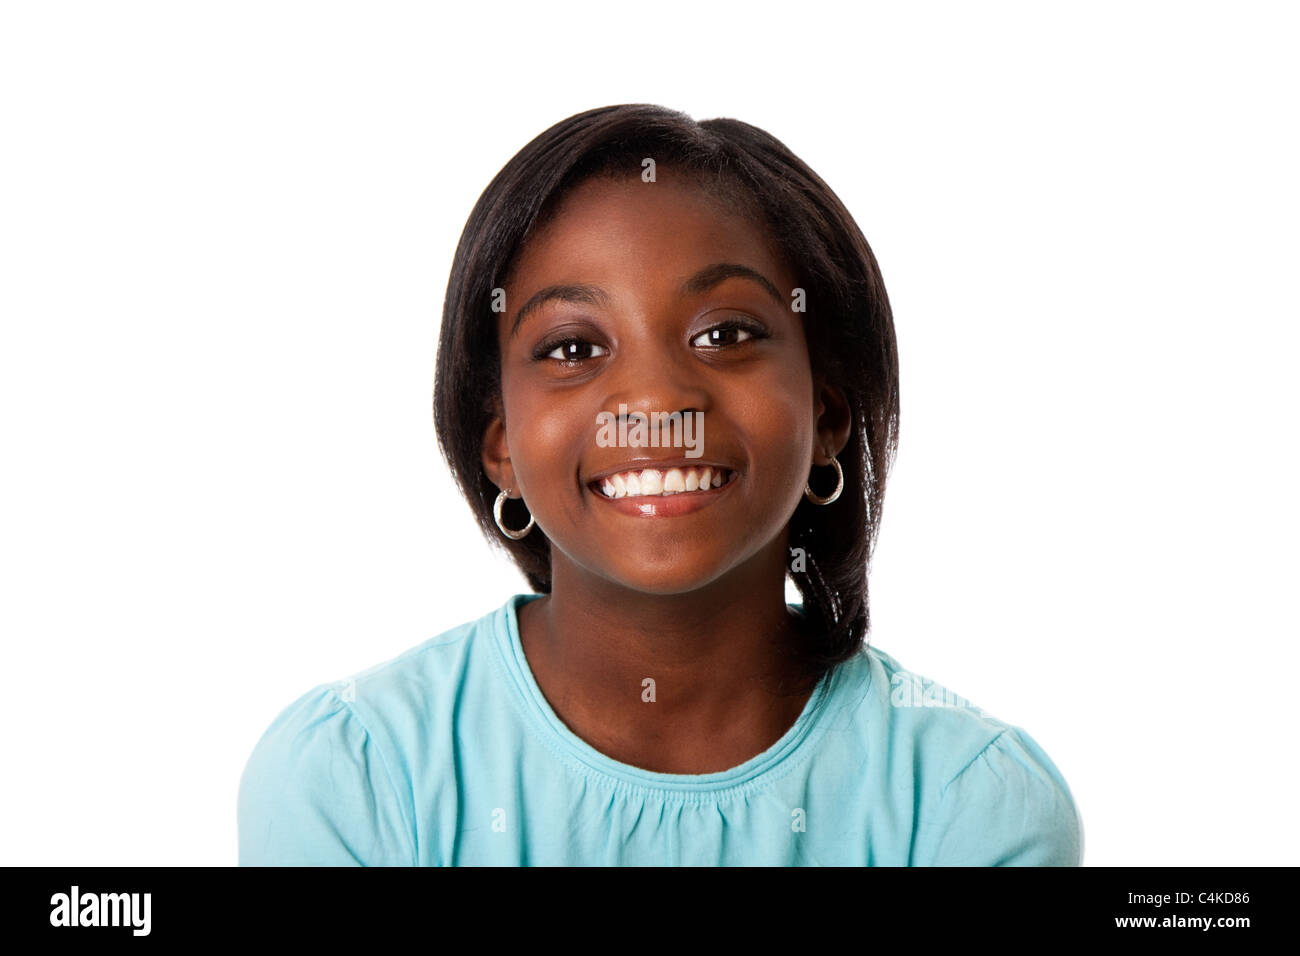 Beautiful smiling face of a happy African teenager girl, isolated. Stock Photo